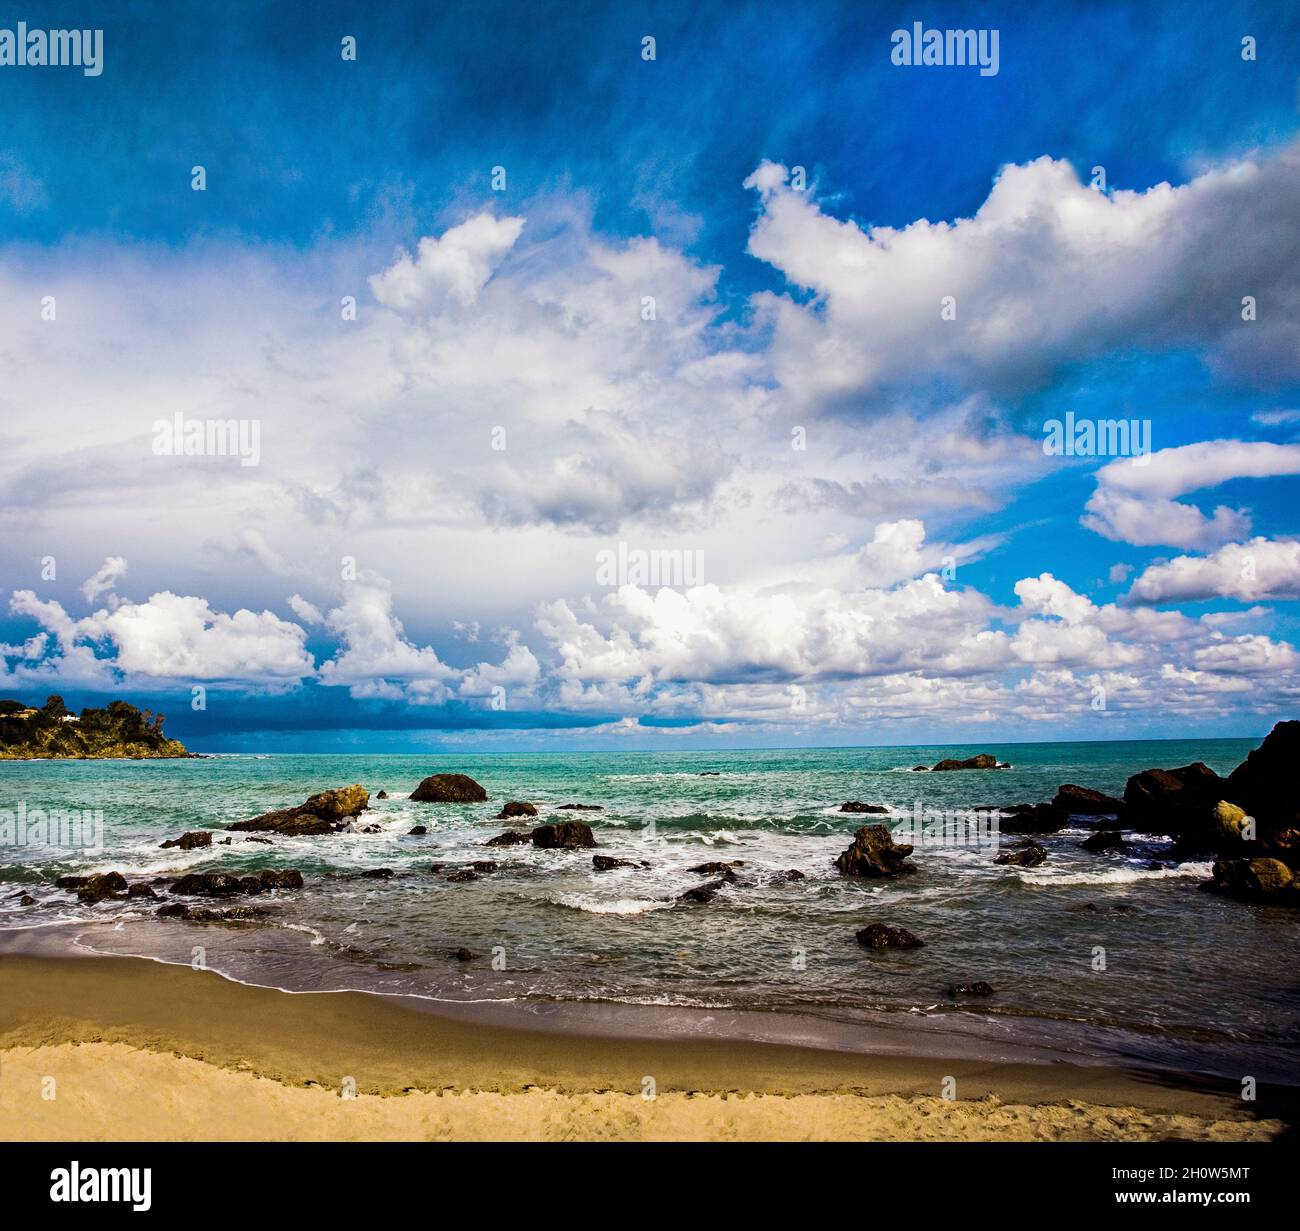 Cefalu Beach in the Province of Palermo on the Island of Sicily. Stock Photo